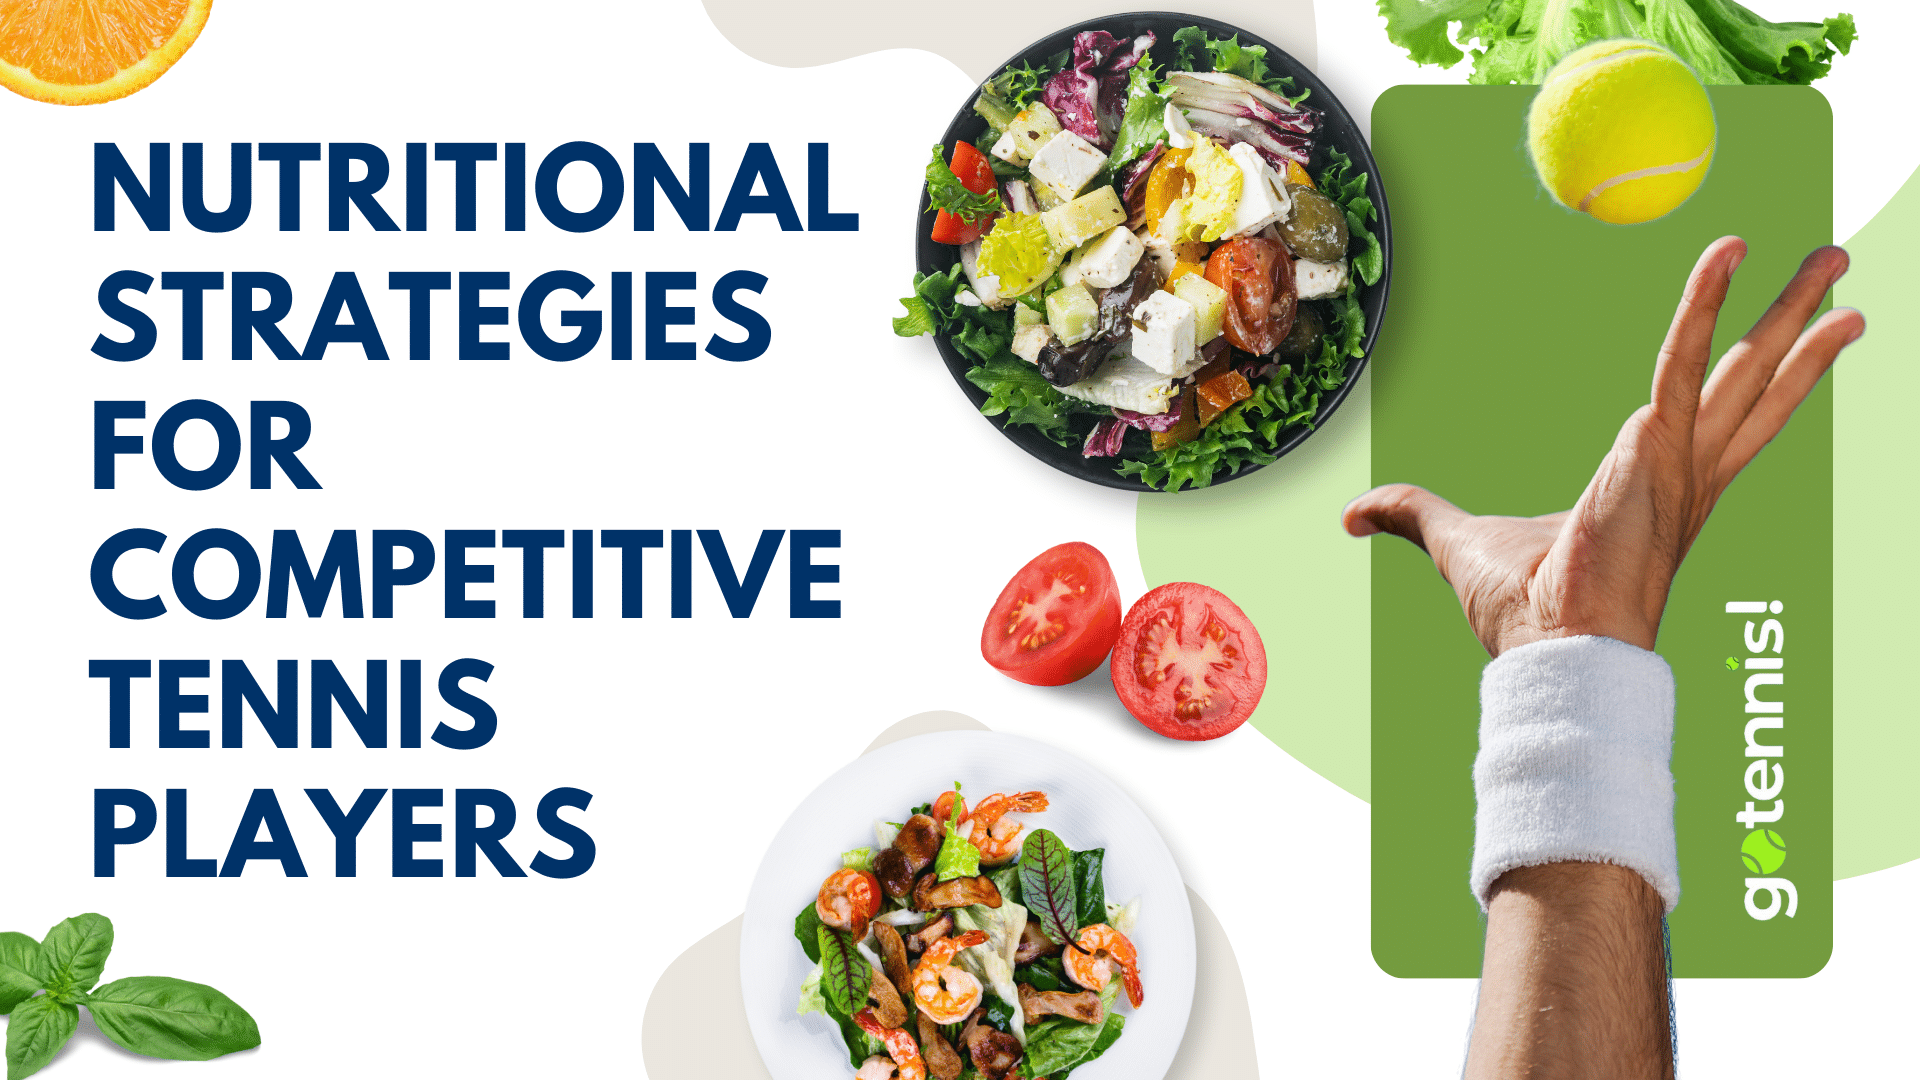 Nutritional Strategies For Competitive Tennis Players